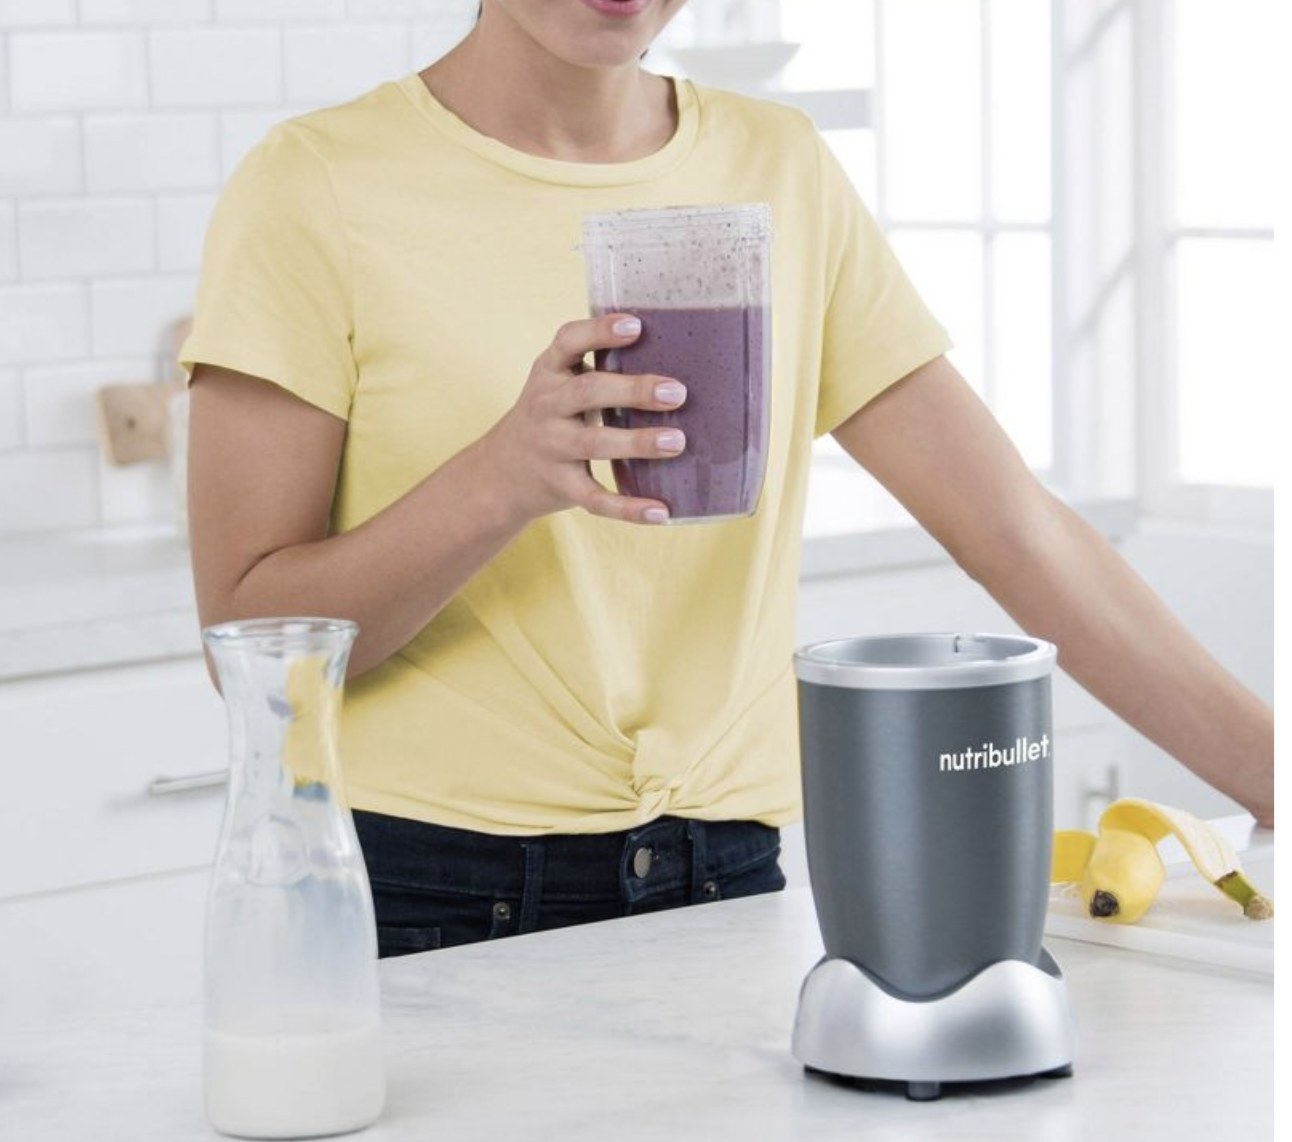 A model drinking a smoothie made with a single serve blender